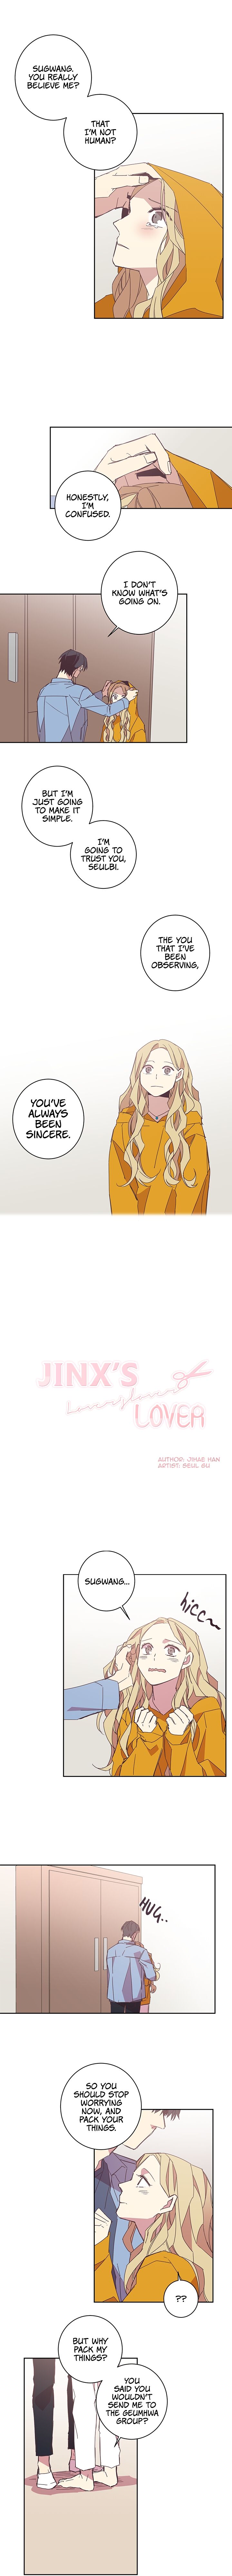 The Jinx's Lover Ch.061 - 3-9